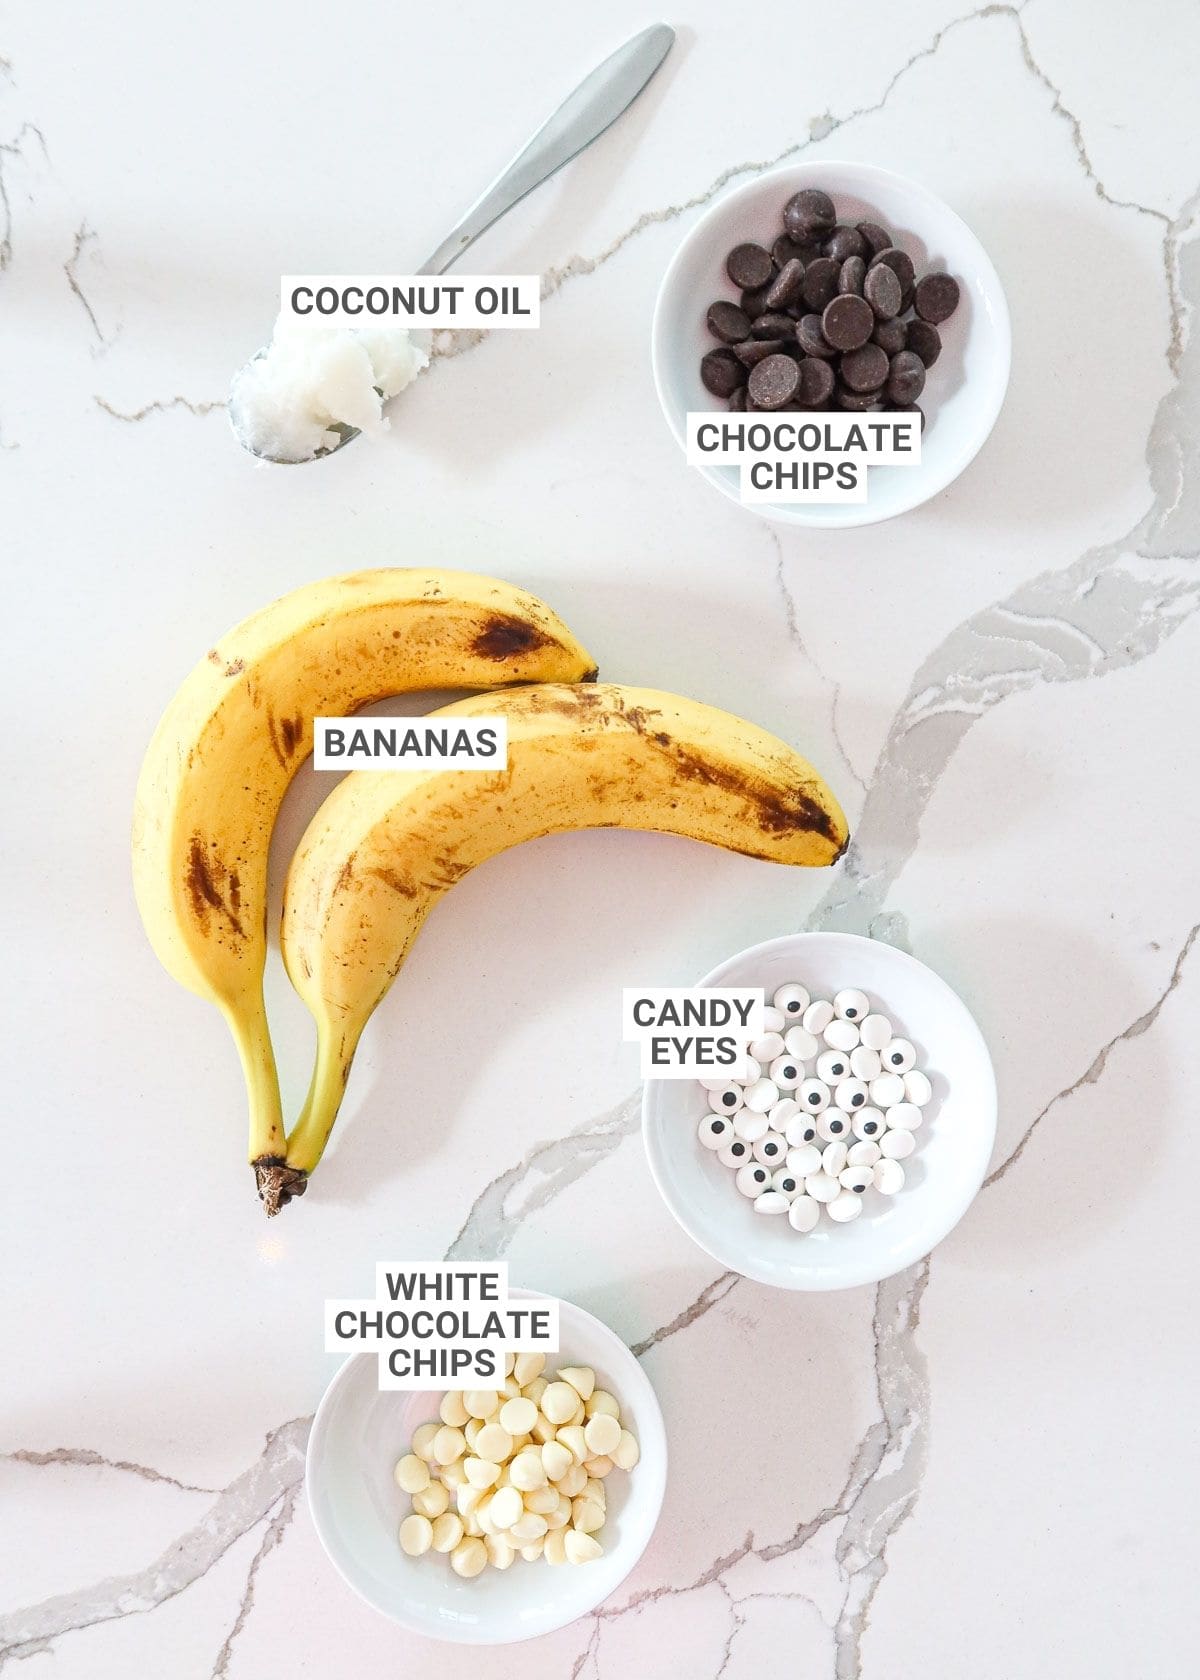 Ingredients for banana mummies with text overlay labels.